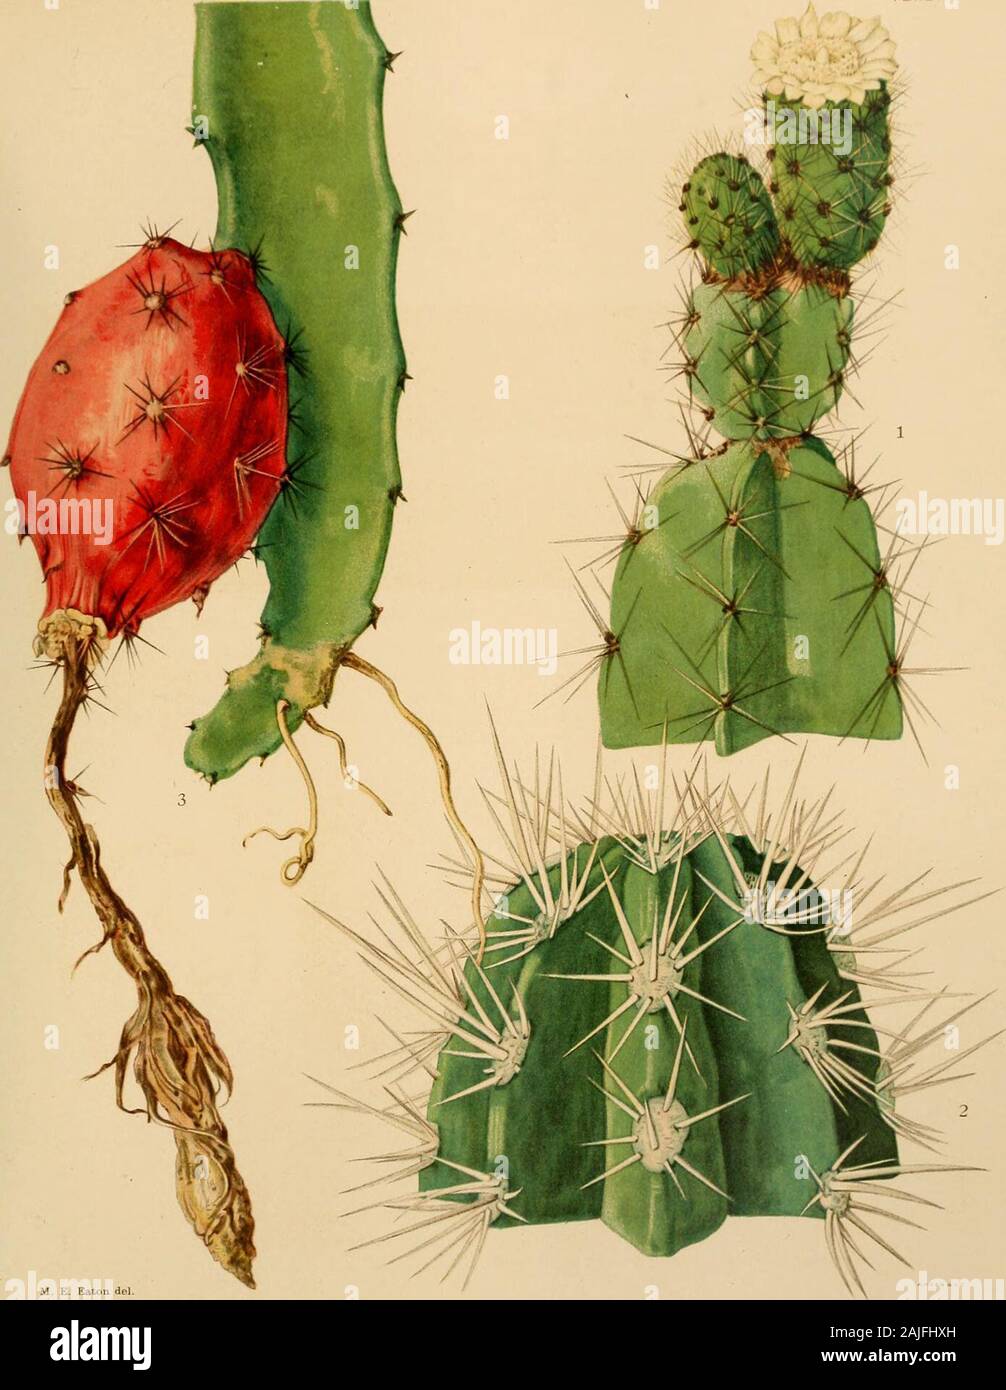 The Cactaceae : descriptions and illustrations of plants of the cactus family . BRITTON AND ROSE, VOL. II. M. E. Eaton dp] 1. Top of flowering branch of Leptocereus arboreus. 2. Top of stem of Lemaireocereus griseus. 3. Fruiting branch of Mediocactus coccineus. (All natural size.) LEPTOCEKEUS. Si 7. Leptocereus sylvestris sp. now Tree-like, up to 5 meters high; joints 2 to 3 cm. in diameter, 5 to 7-ribbed; ribs strongly crenate;areoles 1 to 1.5 cm. apart; spines light brown, long and acicnlar, the longest ones 9 cm. long; fruitsubglobosc, 7 to 8 cm. long, lacaring clusters of short spines, the Stock Photo